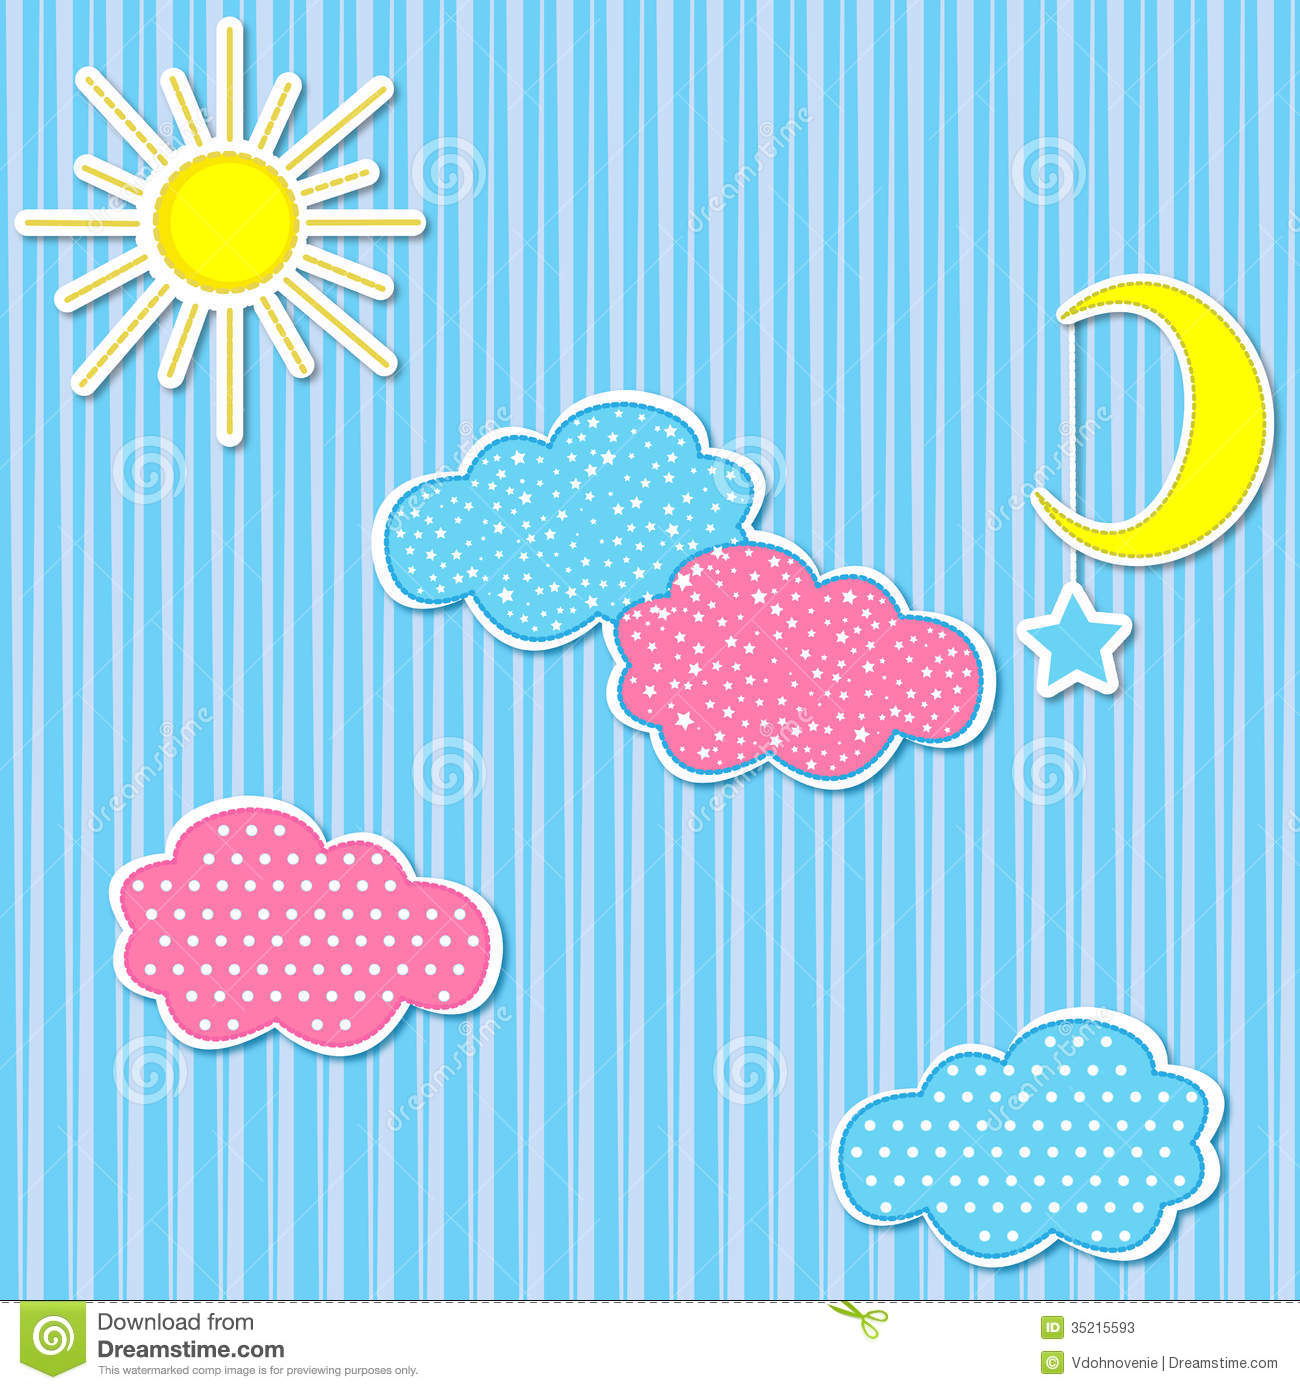 Moon And Stars Wallpaper Border Funny Cloud The Sun